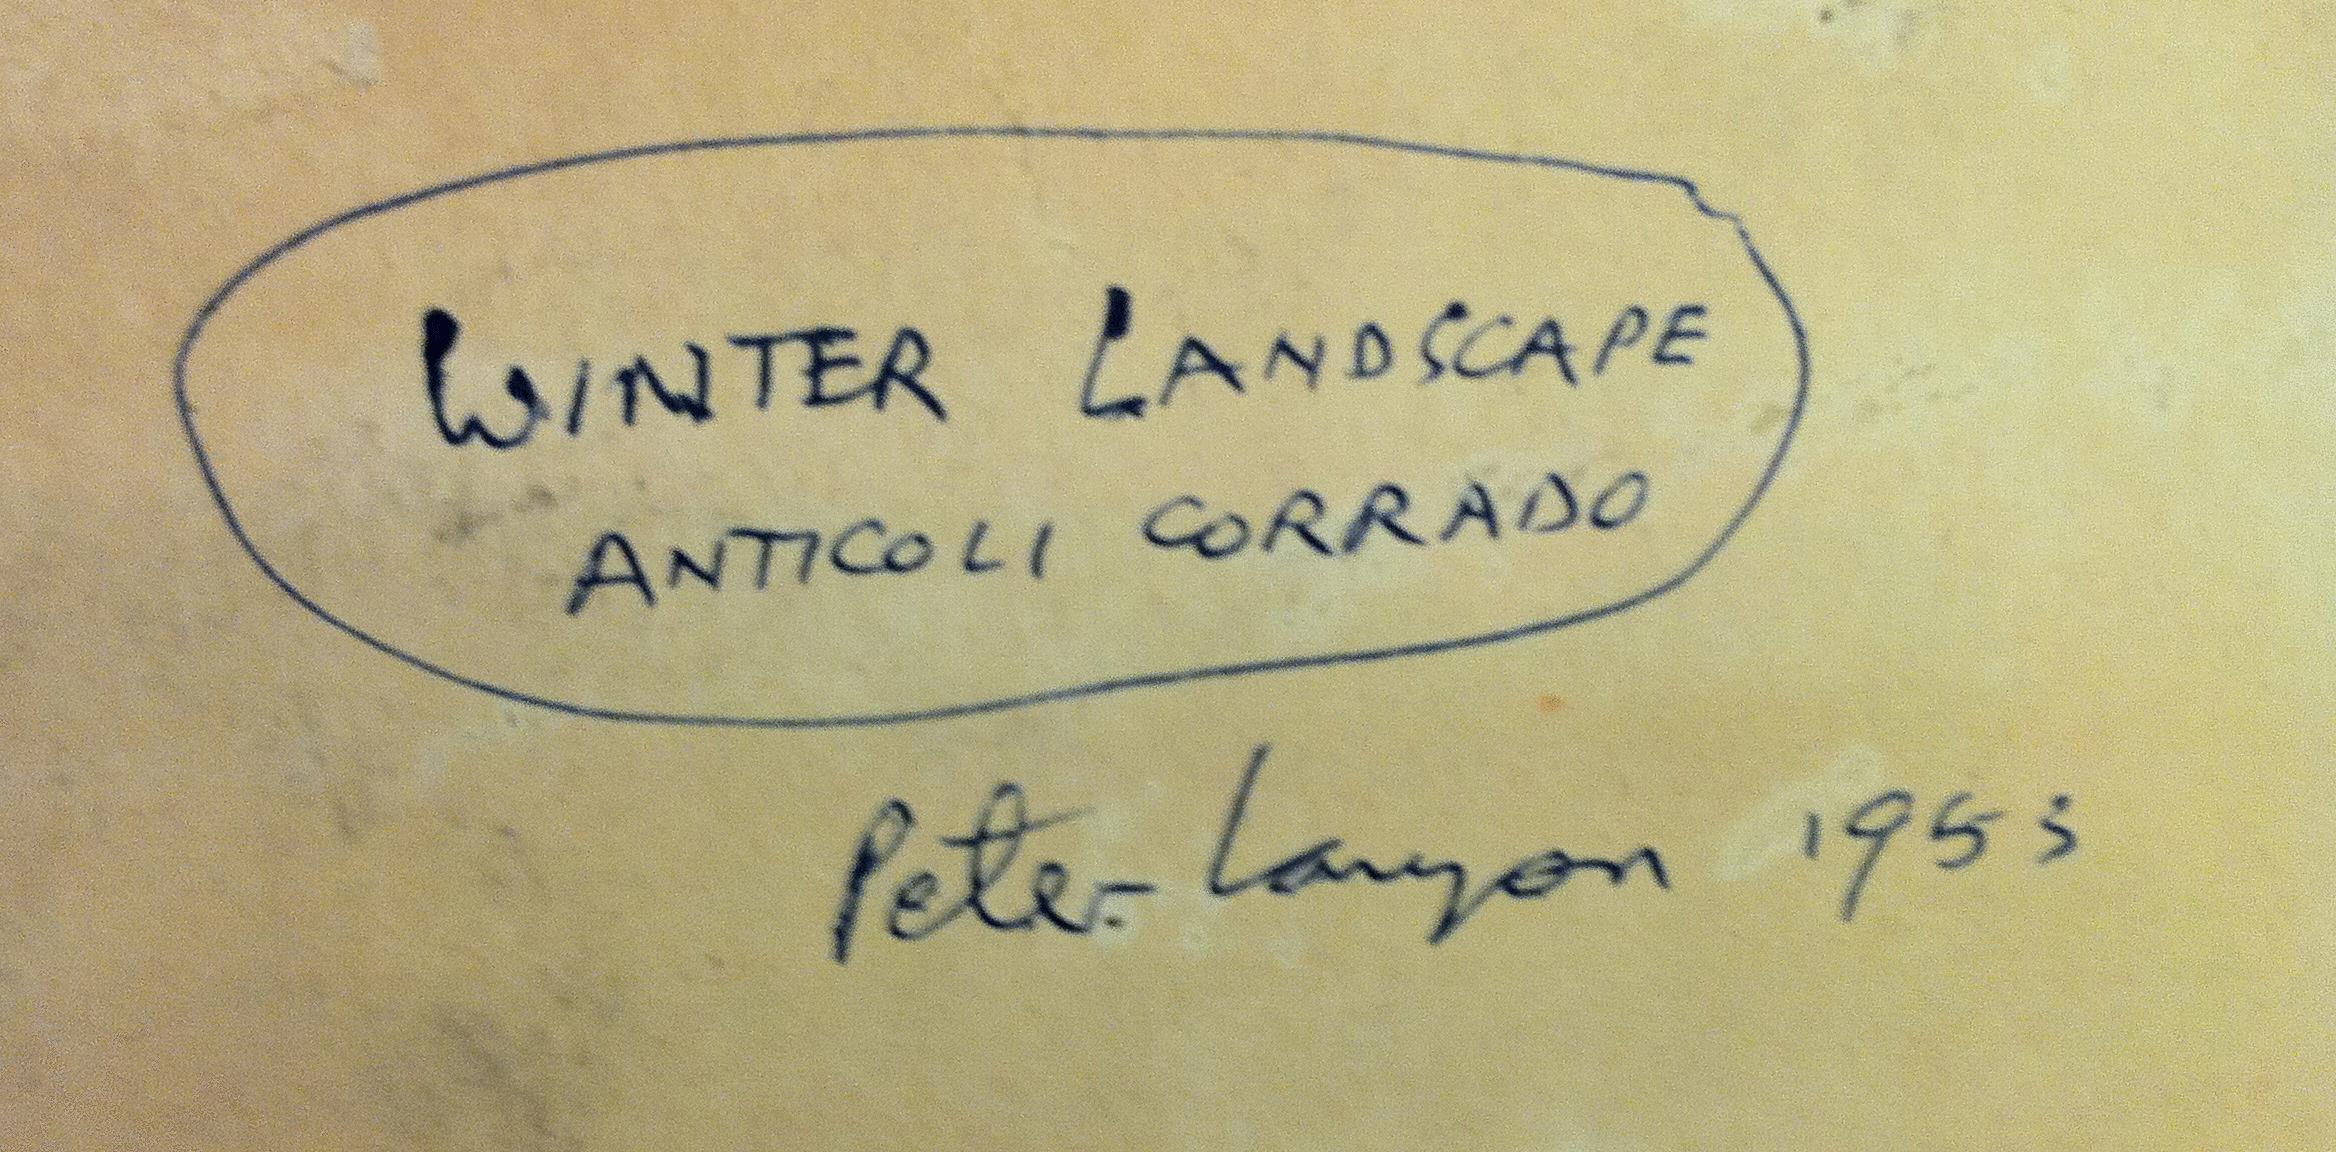 Peter Lanyon (British, 1918-1964) Winter Landscape, Anticoli Corrado 
Signed 'Lanyon' and dated 'Jan 53' (lower left), Further signed, Inscribed and dated again 'WINTER LANDSCAPE/ANTICOLI CORRADO/Peter Lanyon 1953' by the artist on a label attached